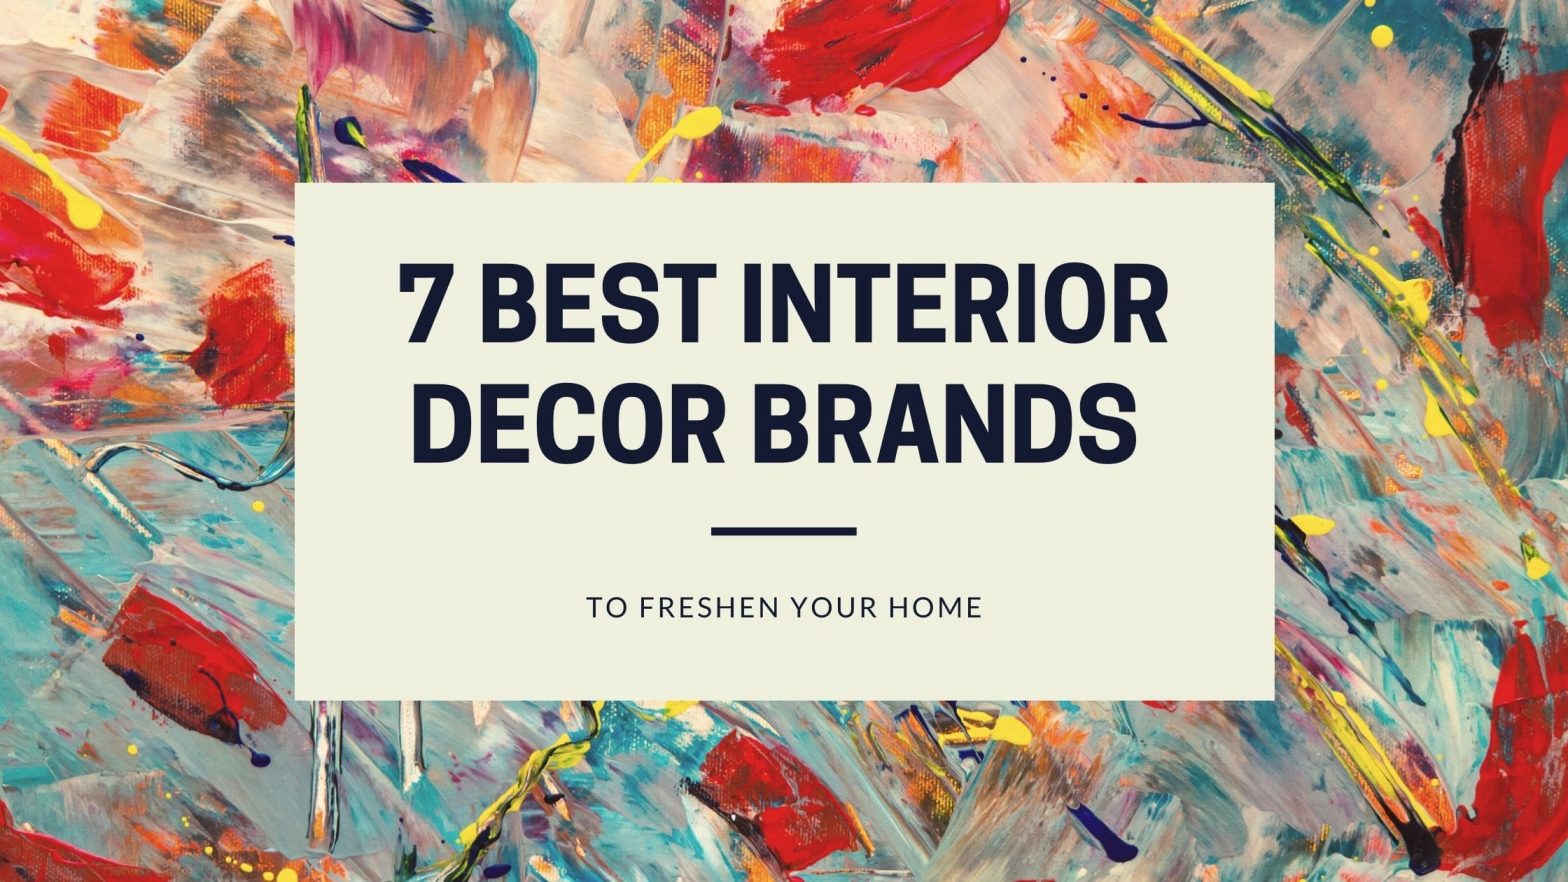 7 Best Interior Decor Brands to Freshen Up Your Home